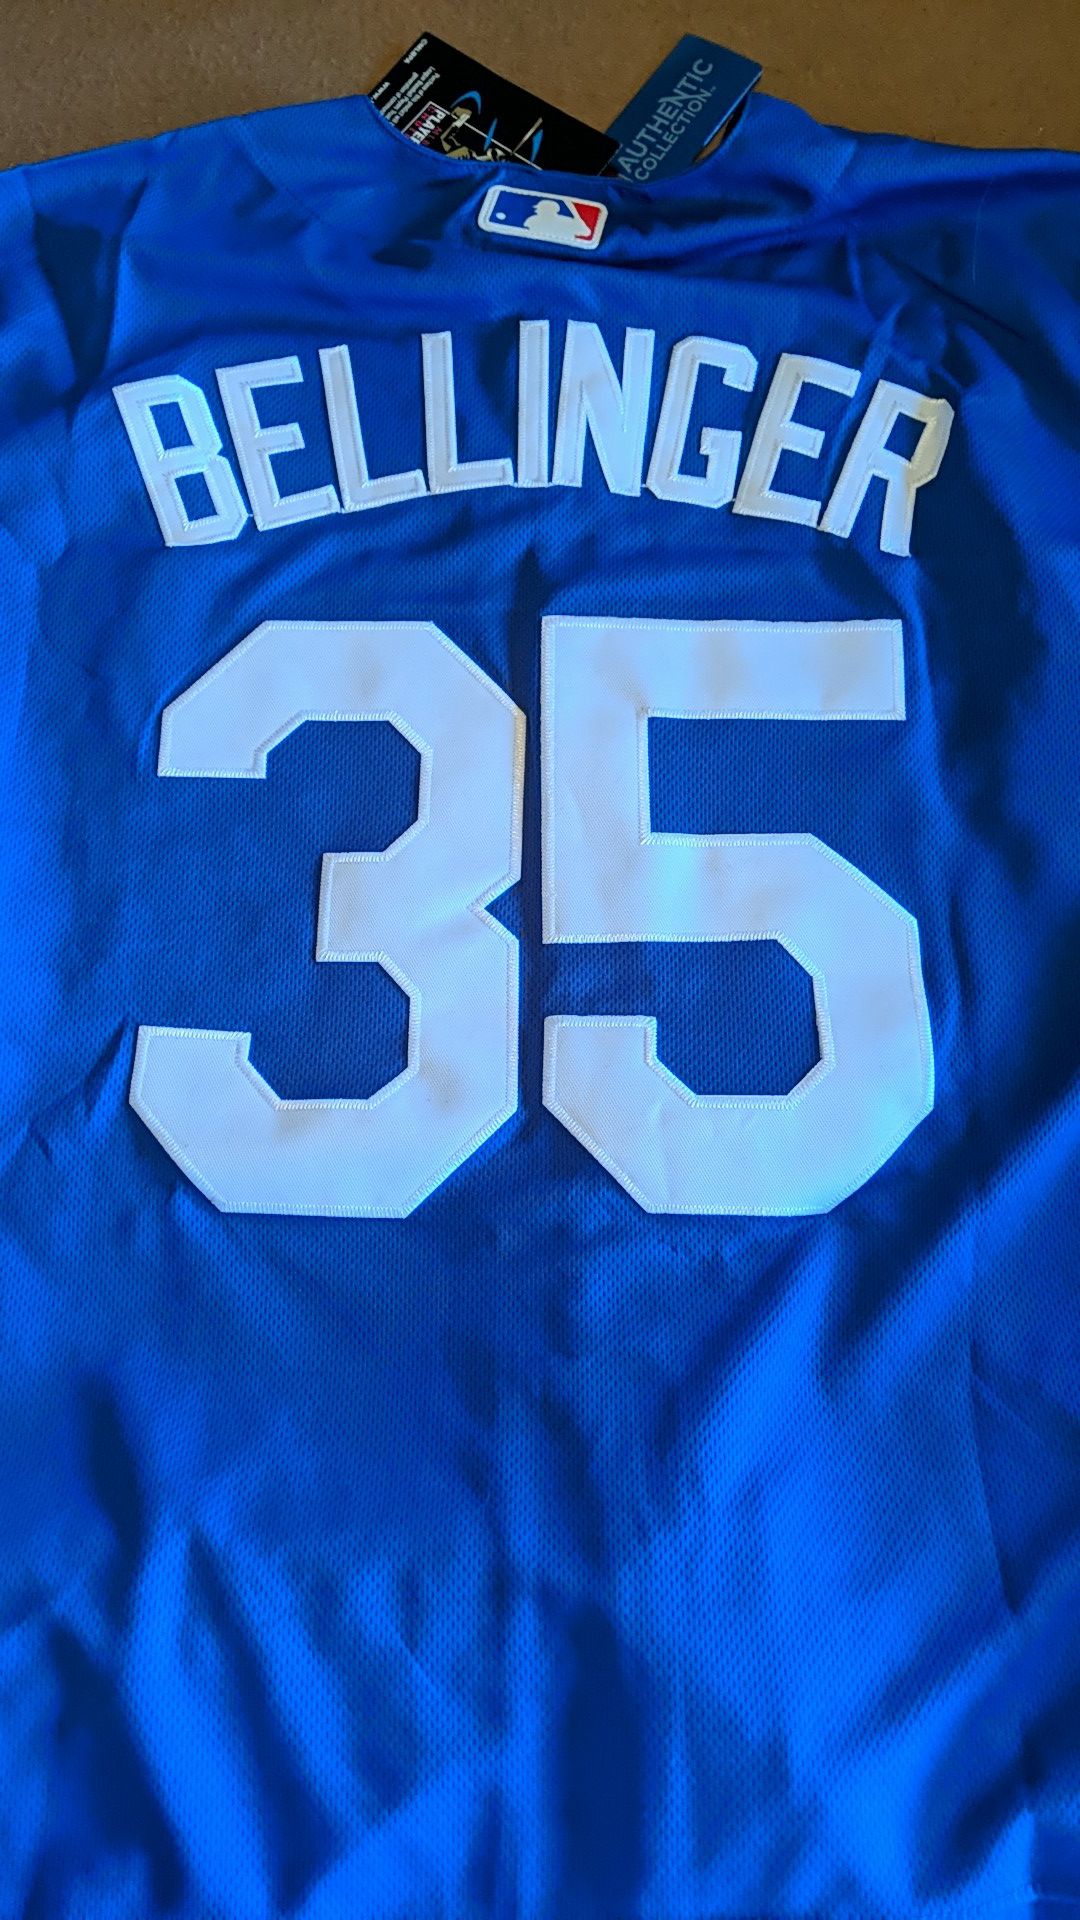 New Cody bellinger large dodgers jersey